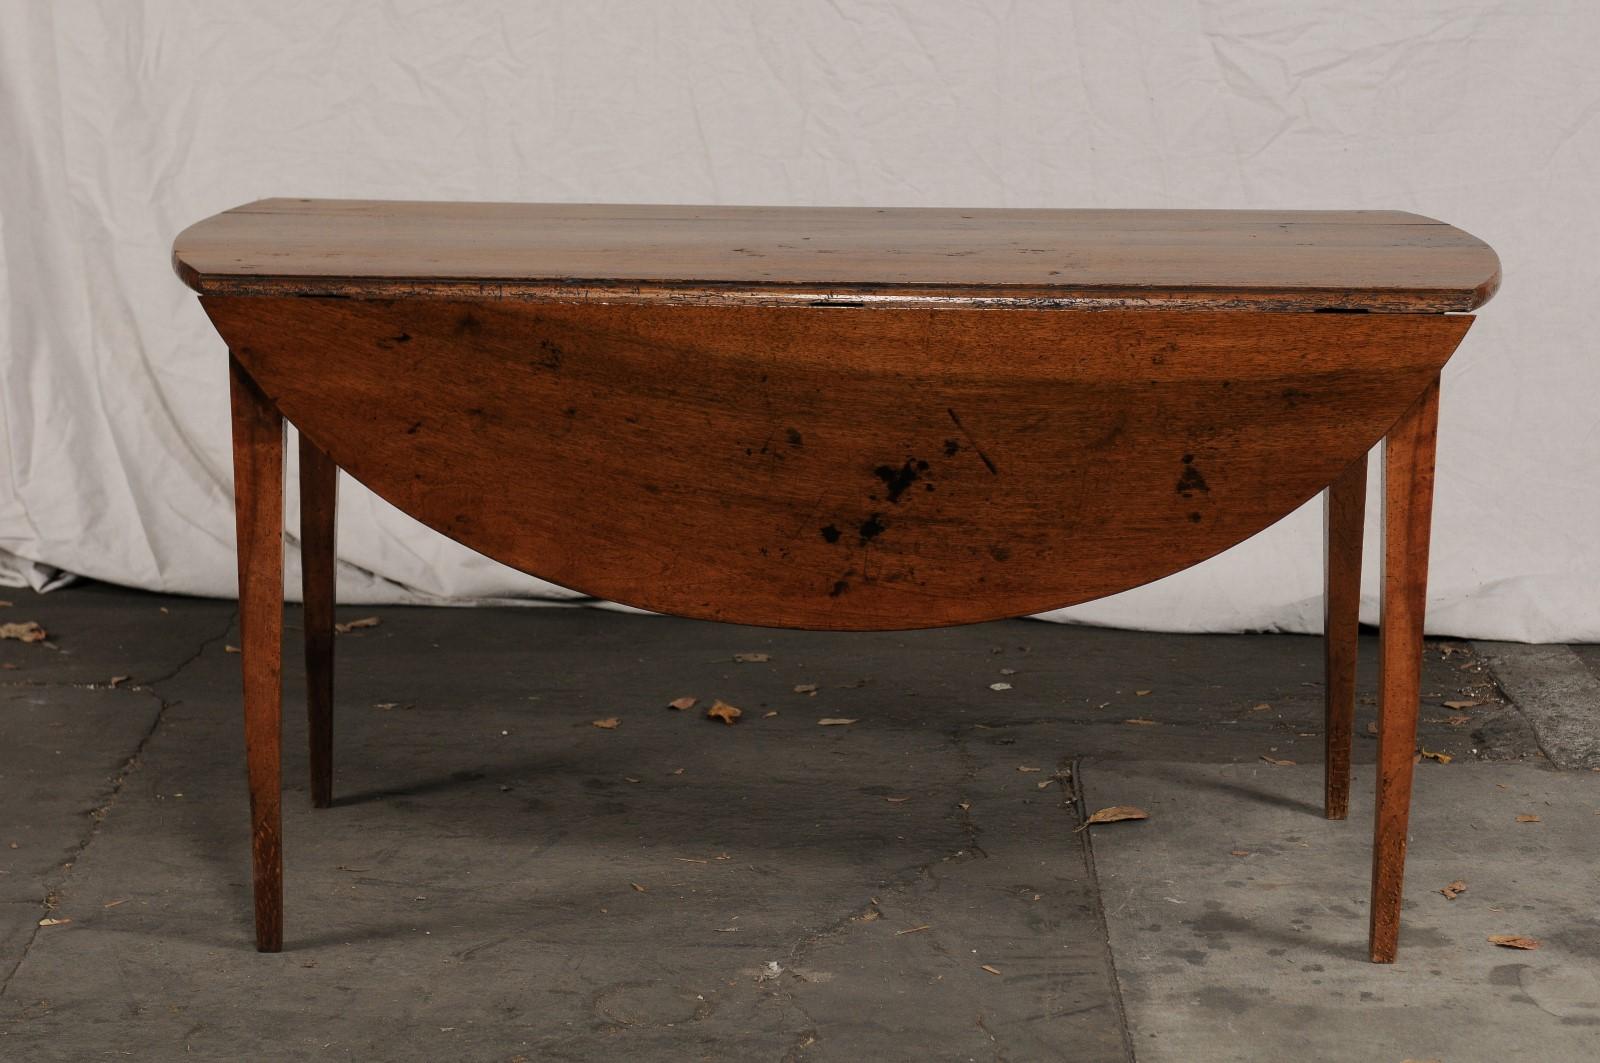 19th century Continental fruitwood breakfast table, drop-leaf, 49.5